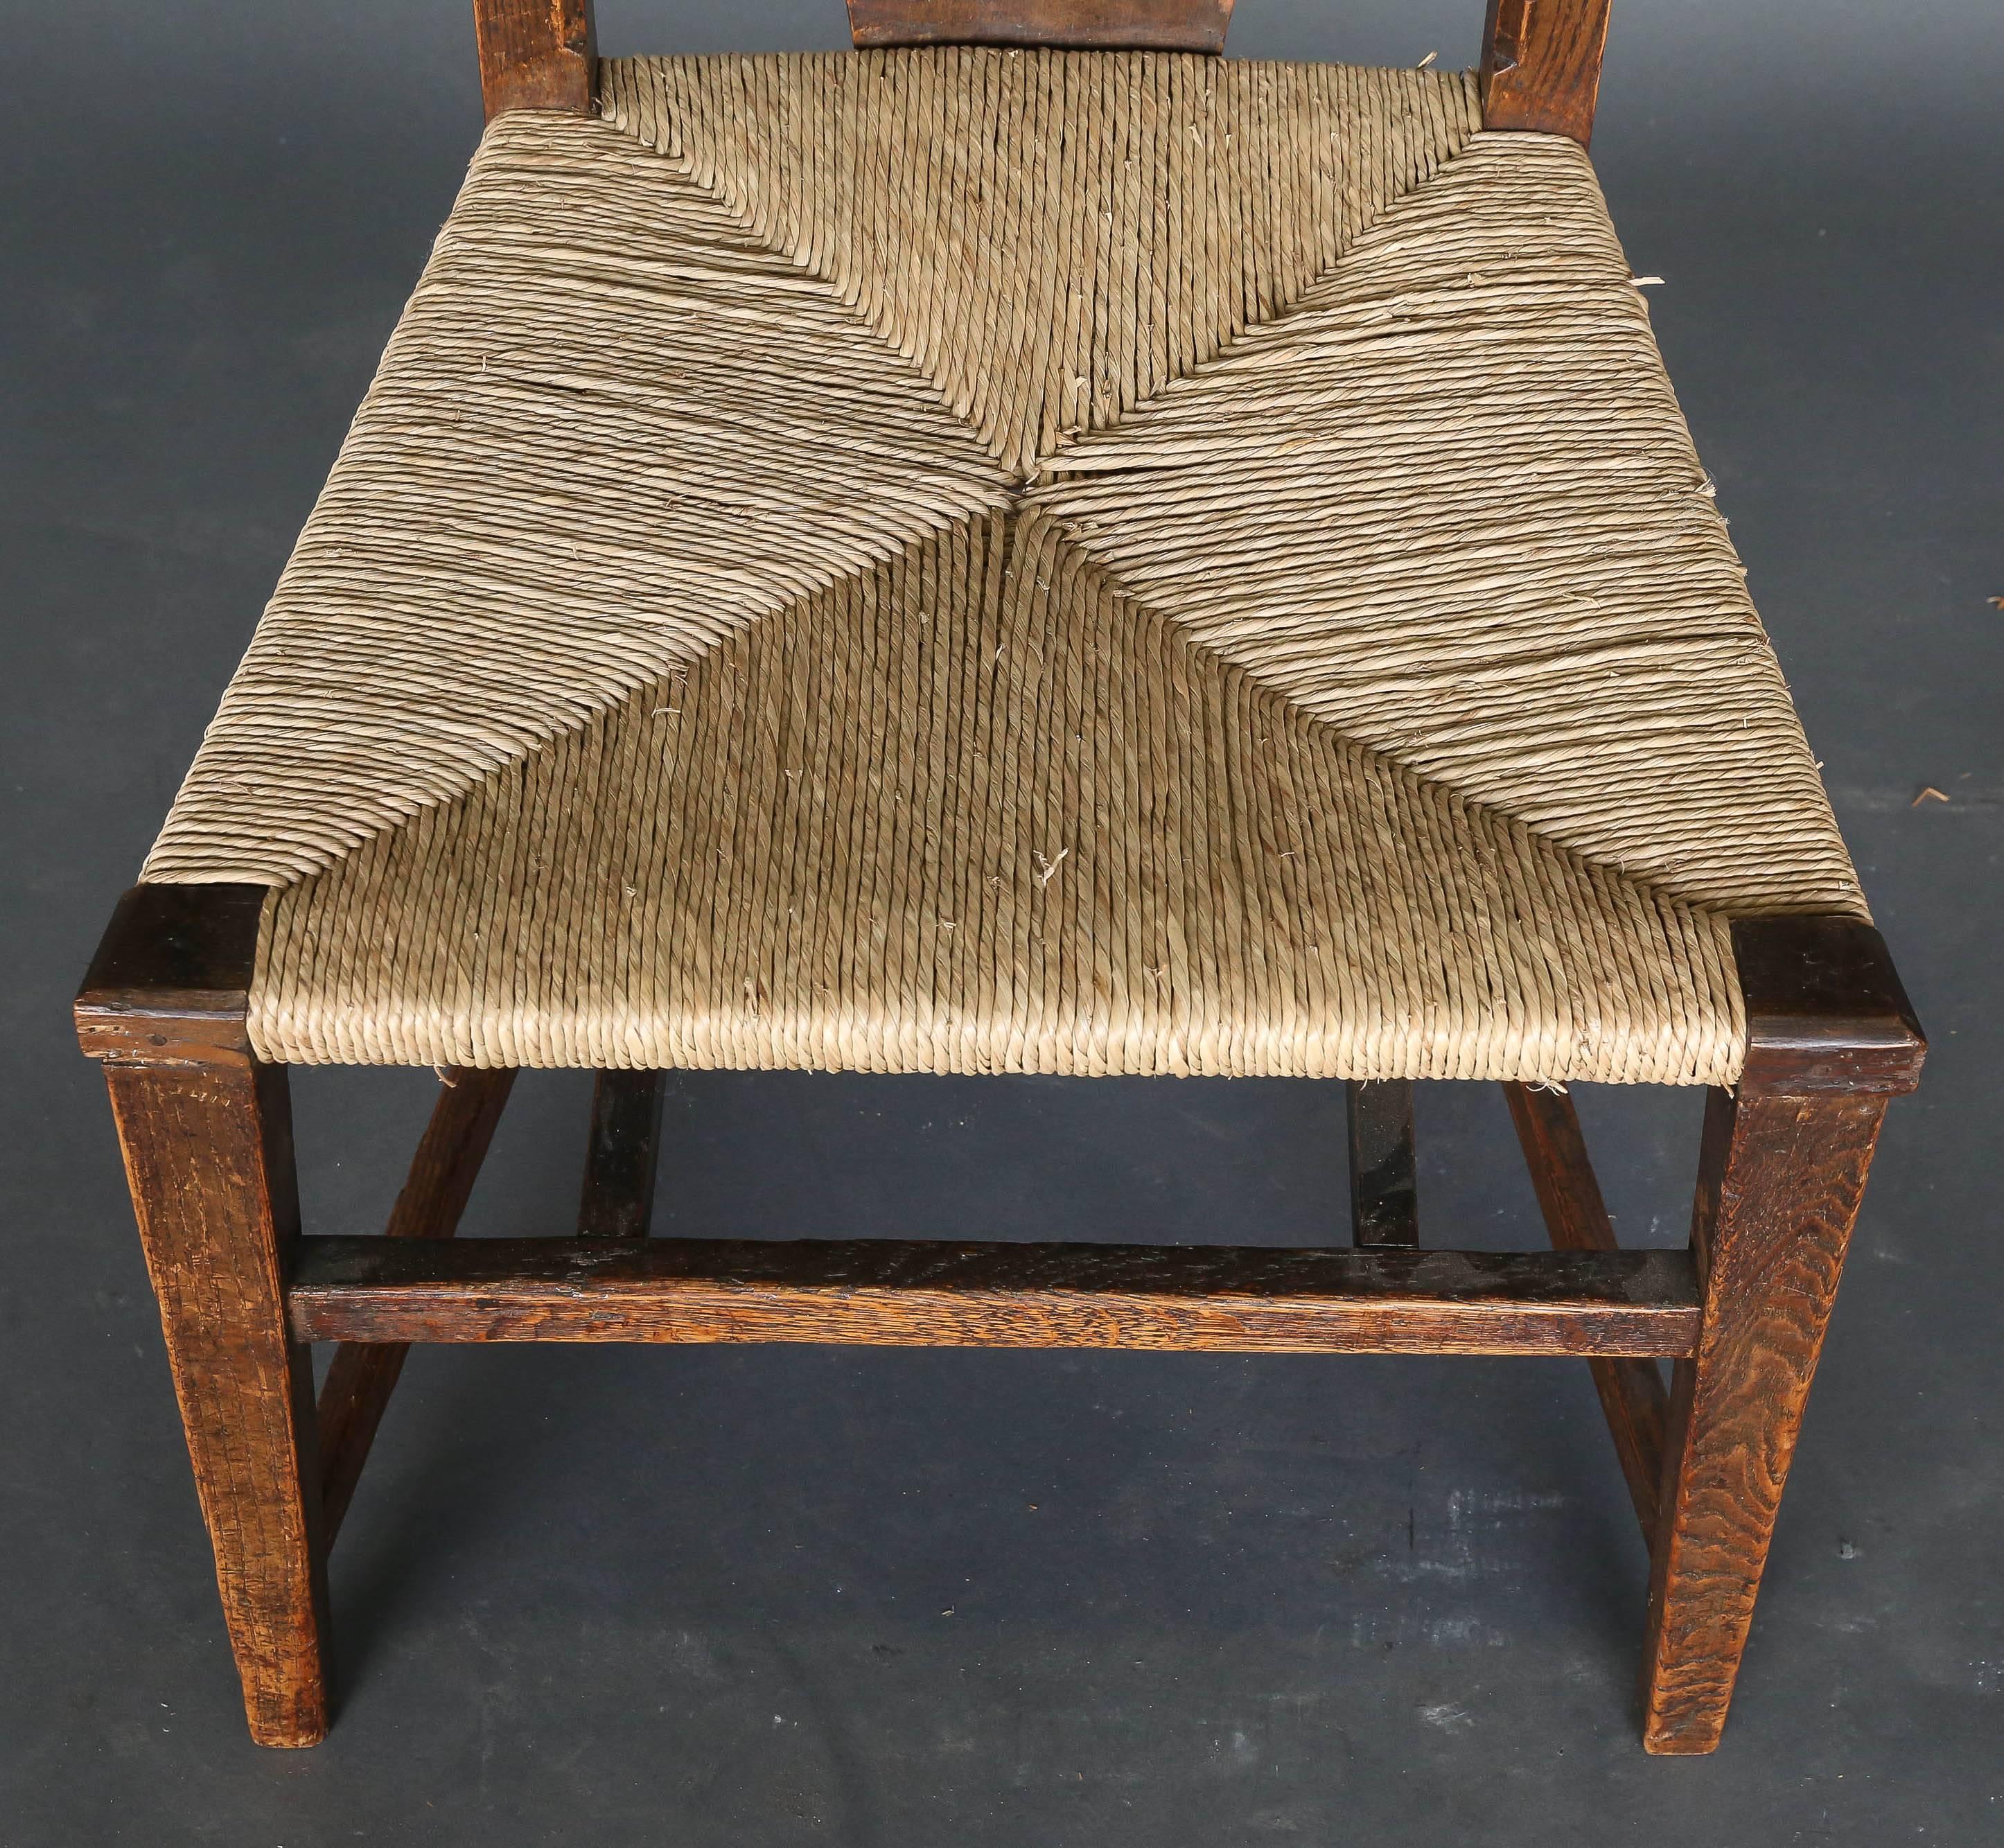 This pair of ash Abingwood chairs was designed in 1896 by George Walton, together with Charles Rennie Mackintosh, and used   for the billiard room of Miss Cranston's tea rooms on Buchanan Street, Glasgow.

Walton designed the billiard room and